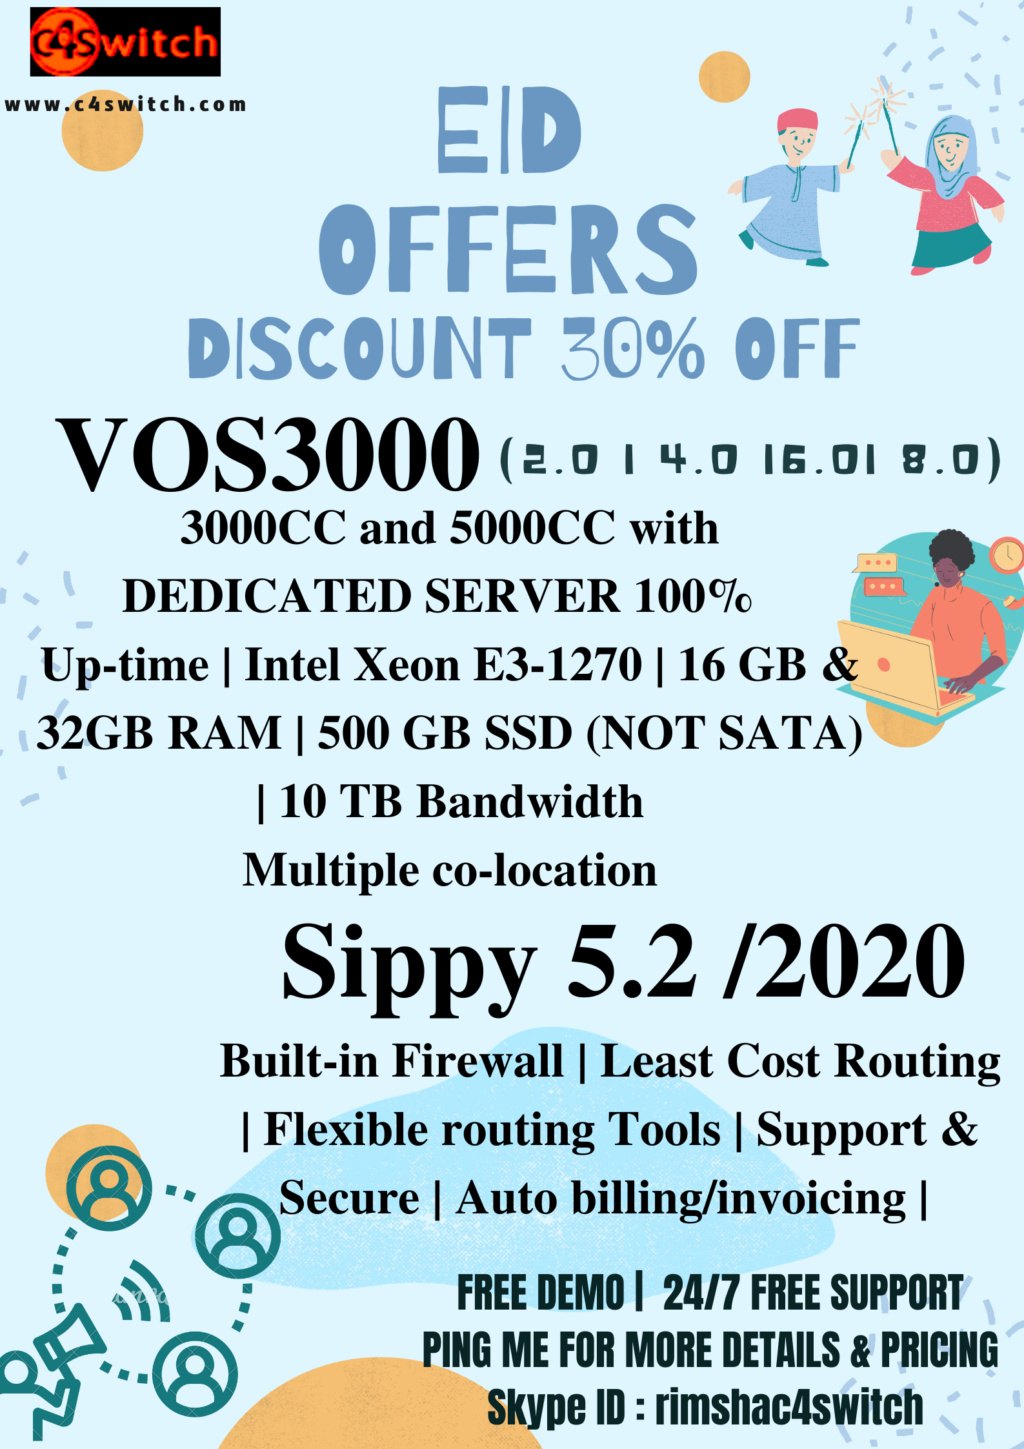  Reply New Topic EID OFFERS DISCOUNTS 30%OFF VOS3000 & SIPPY.. Eidd11